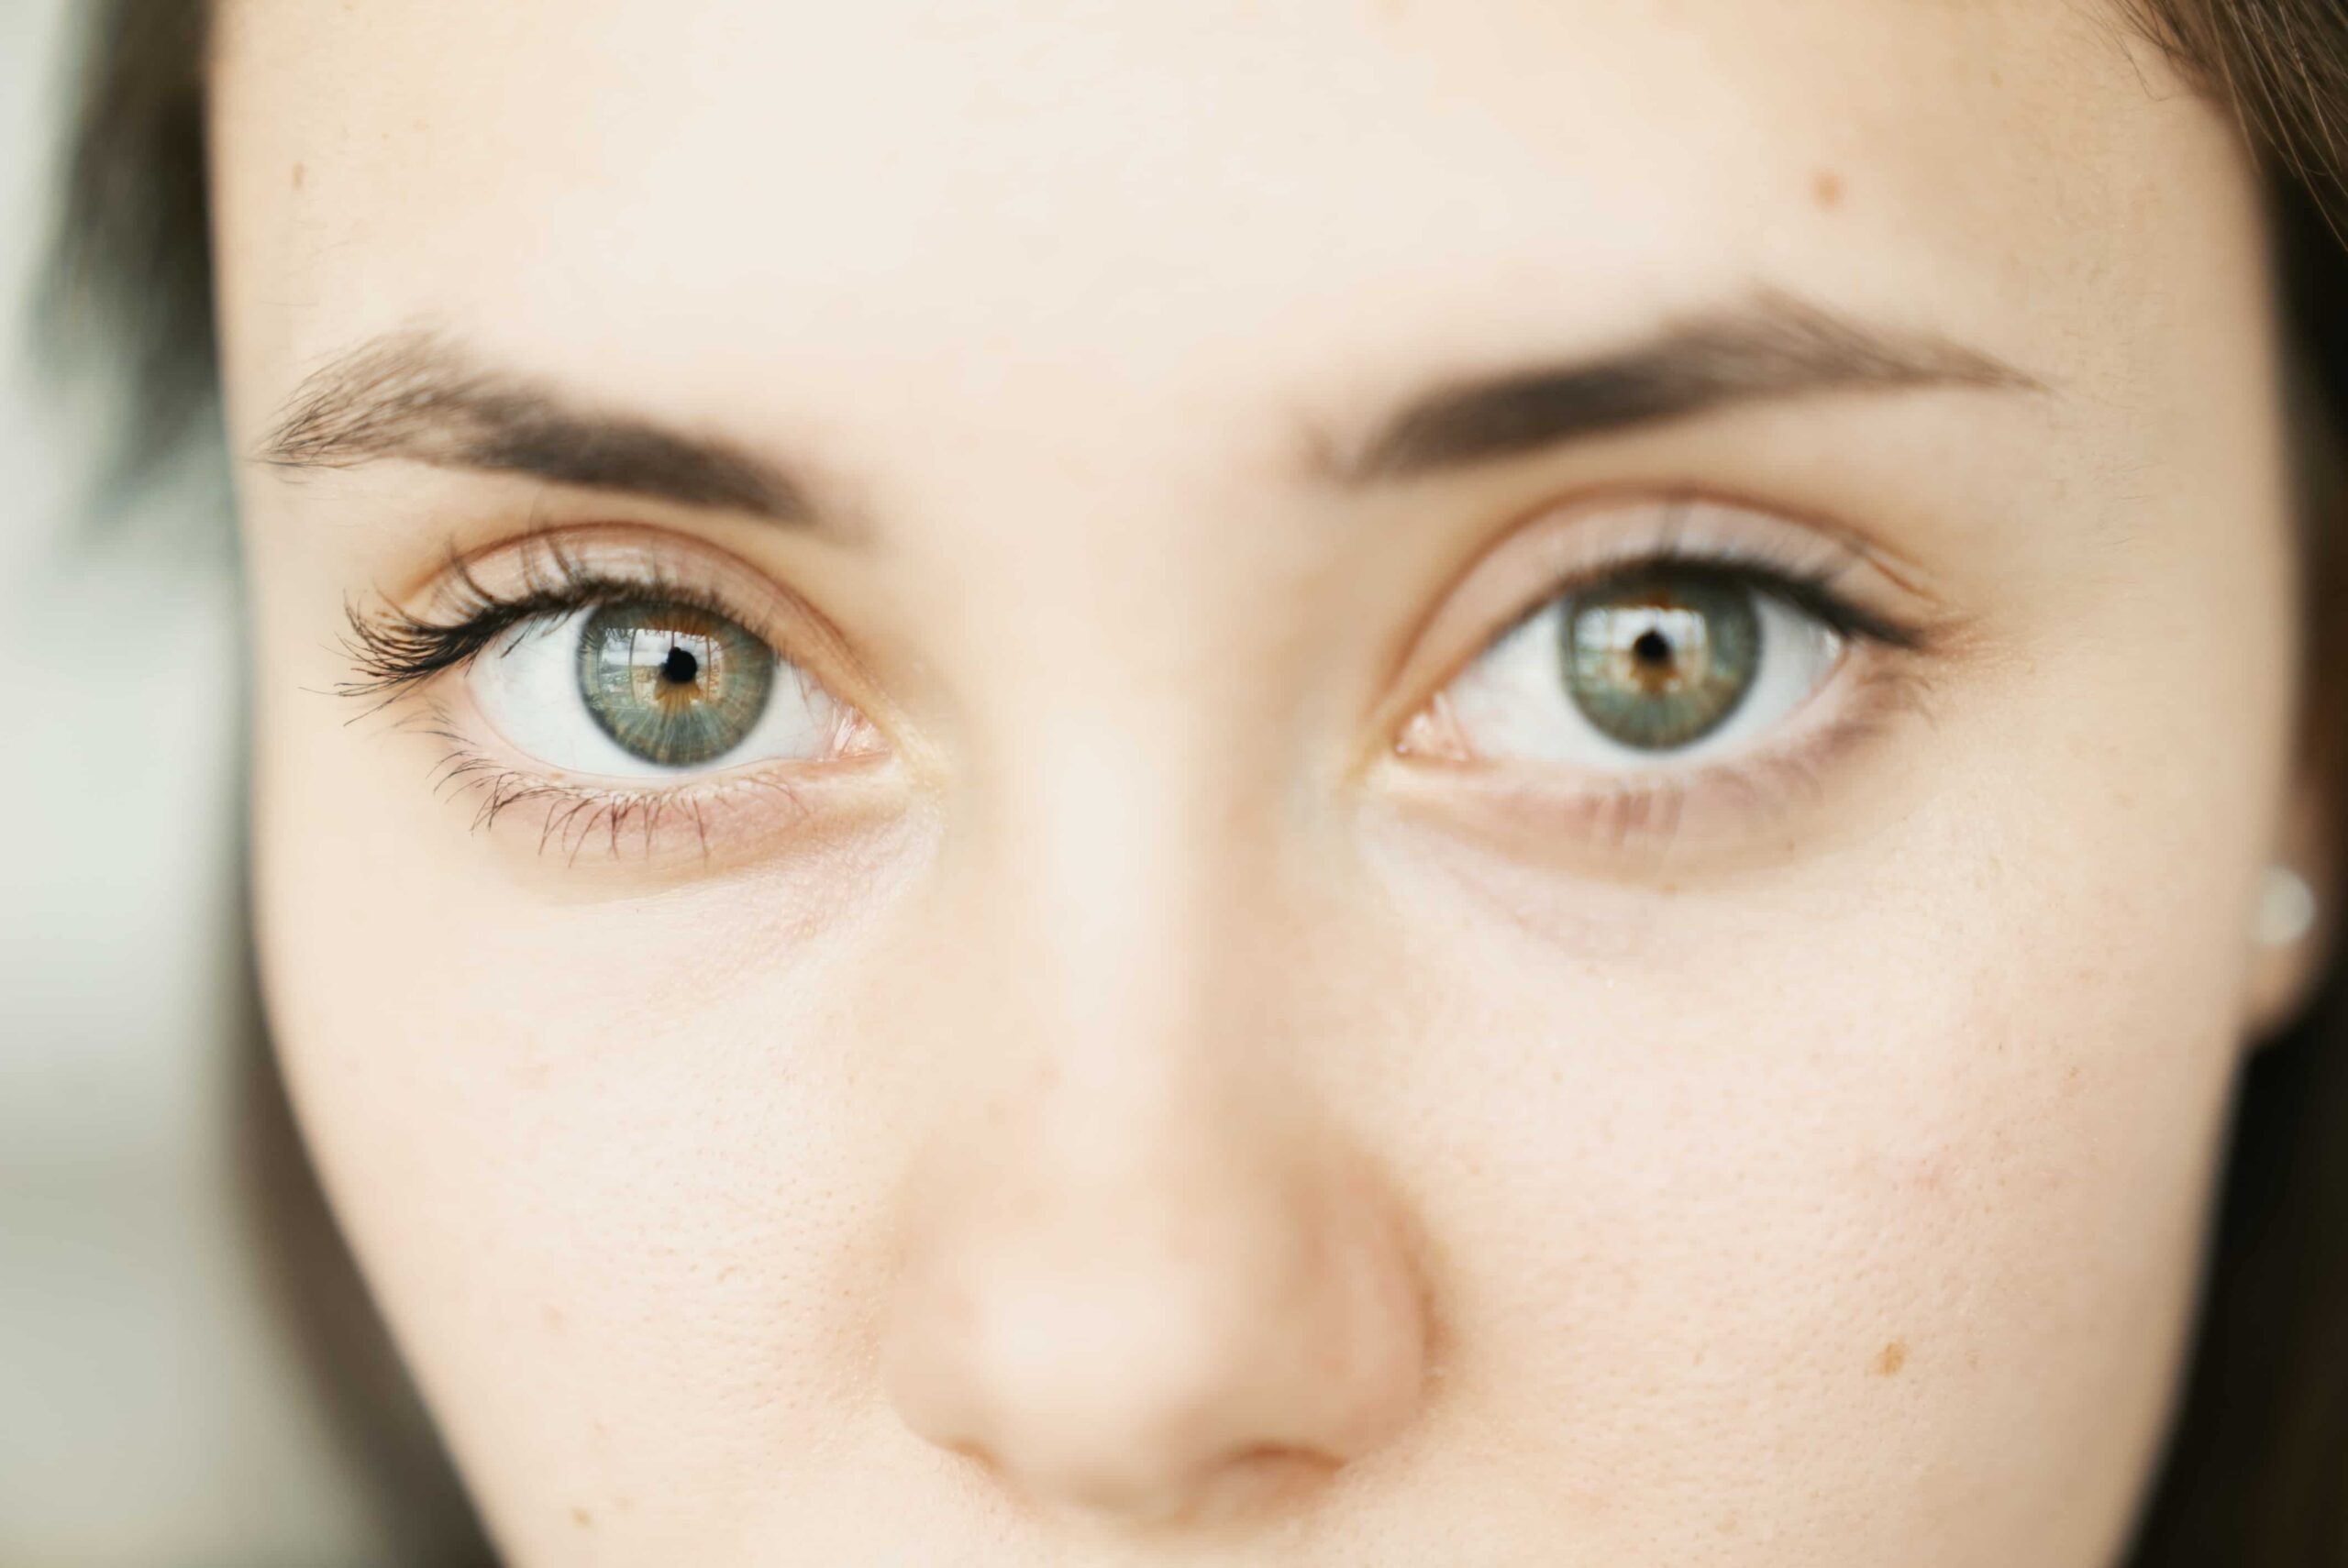 woman with healthy eyes, close-up